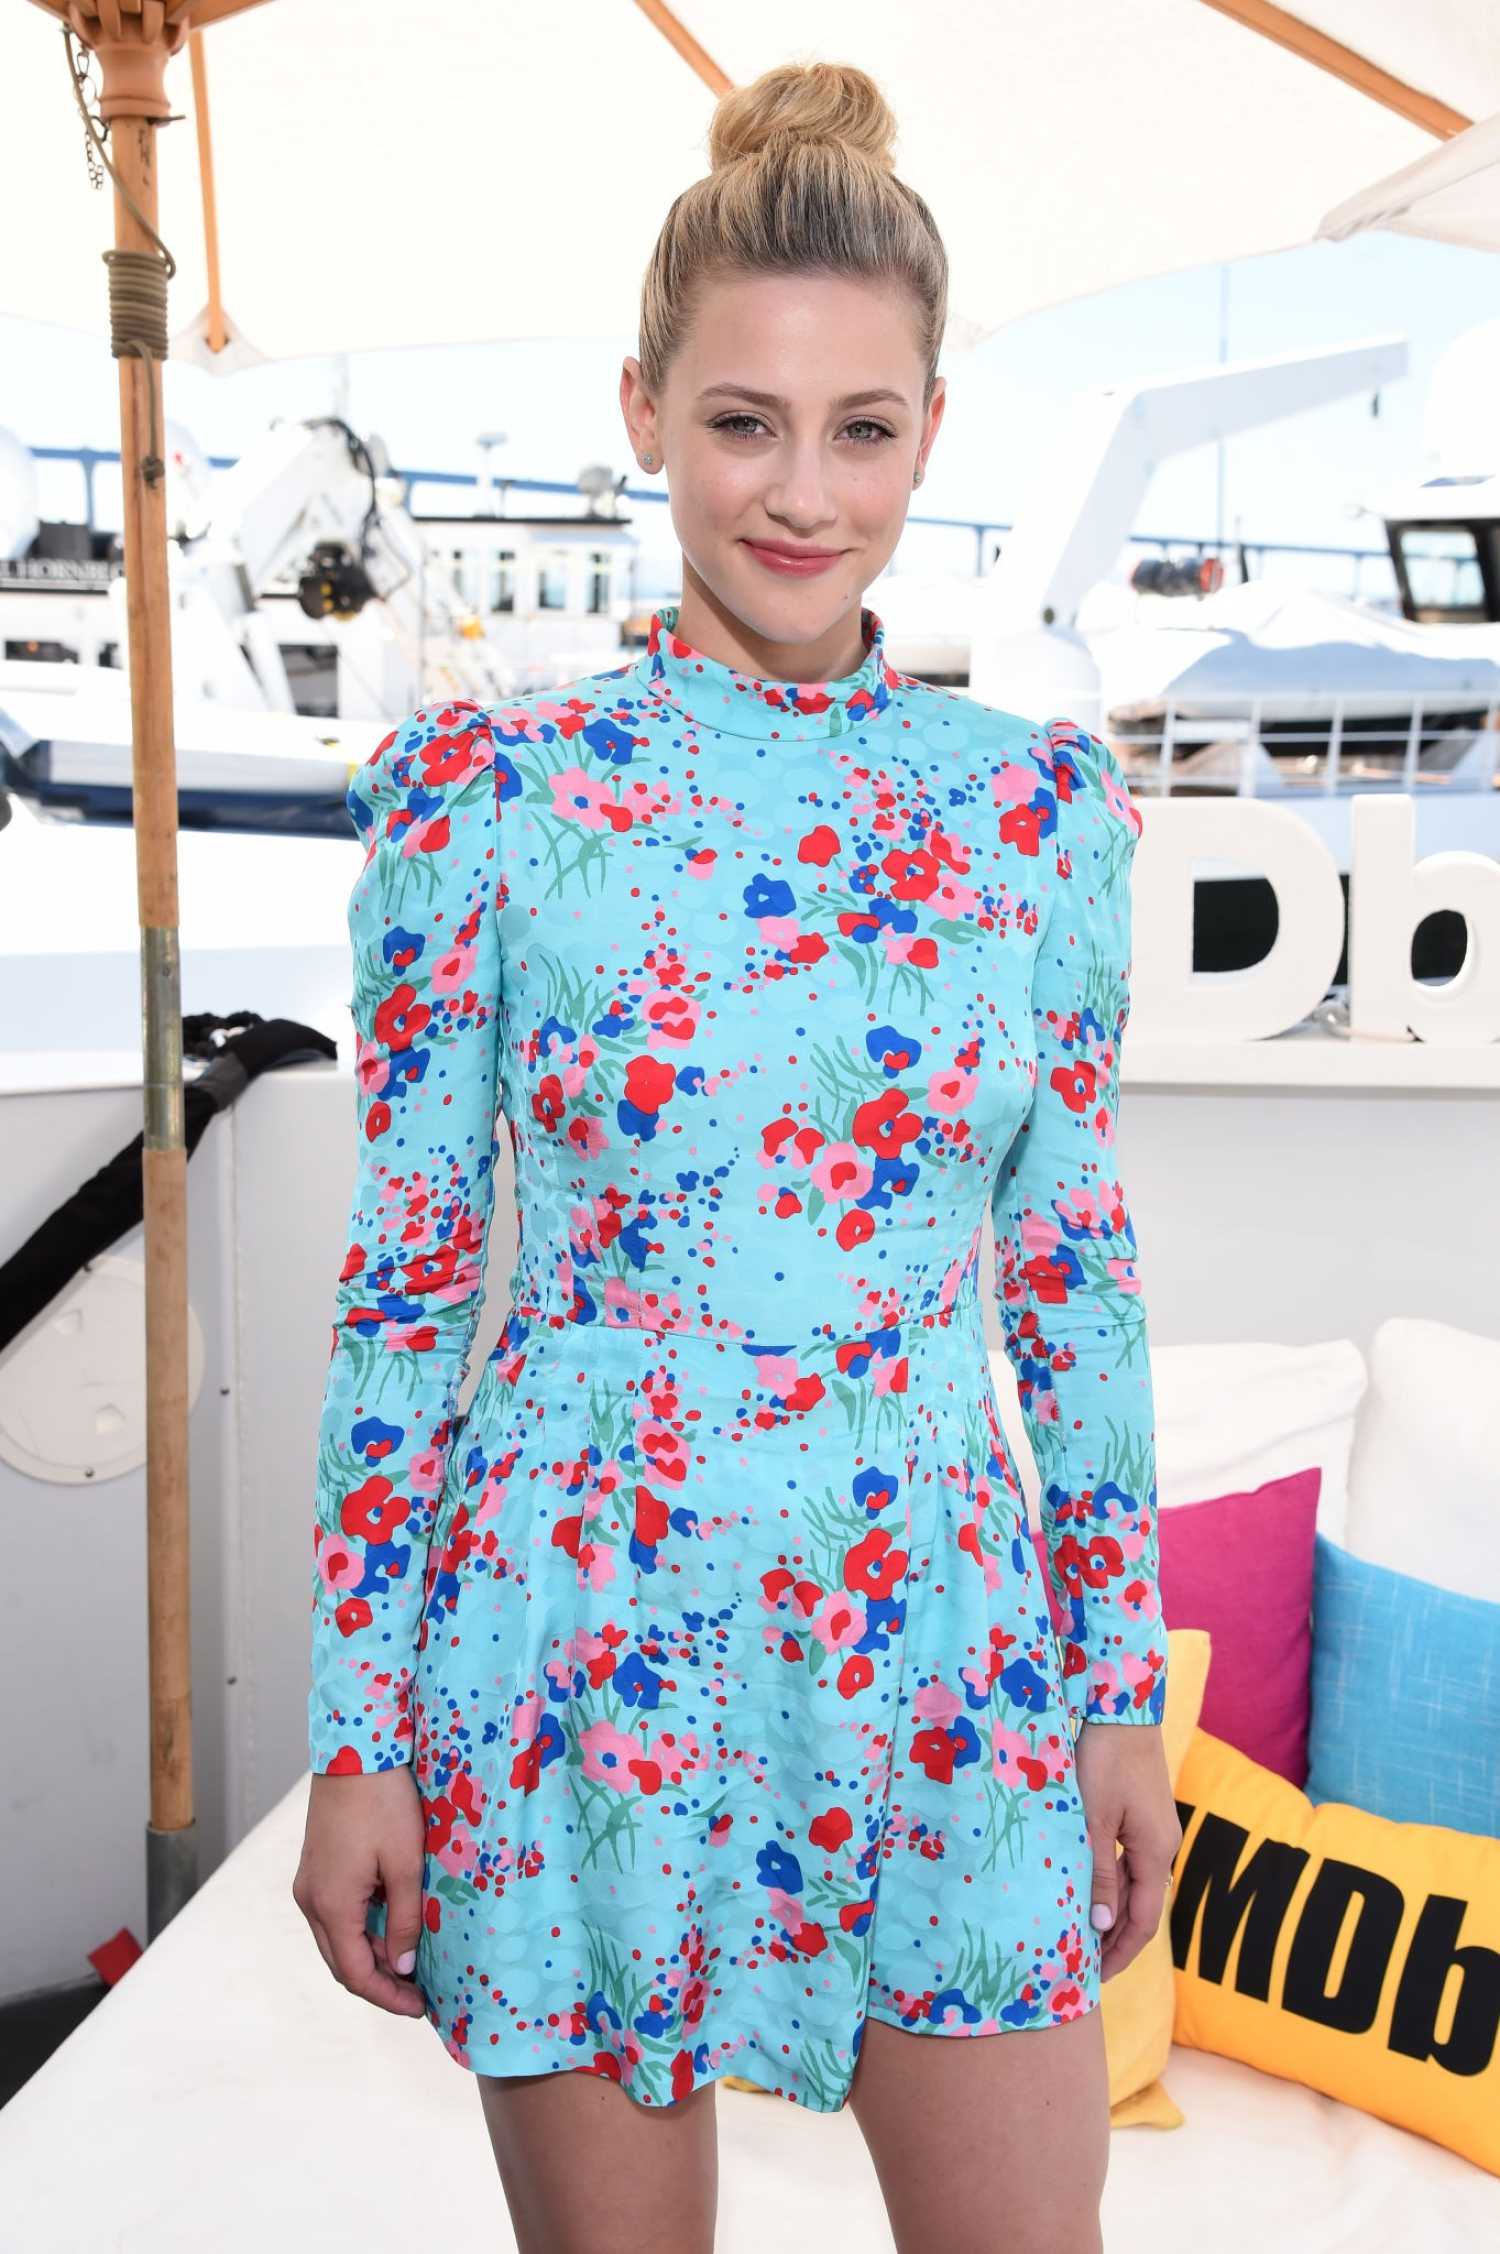 Lili Reinhart Attends The Imdboat During 2019 Comic Con At